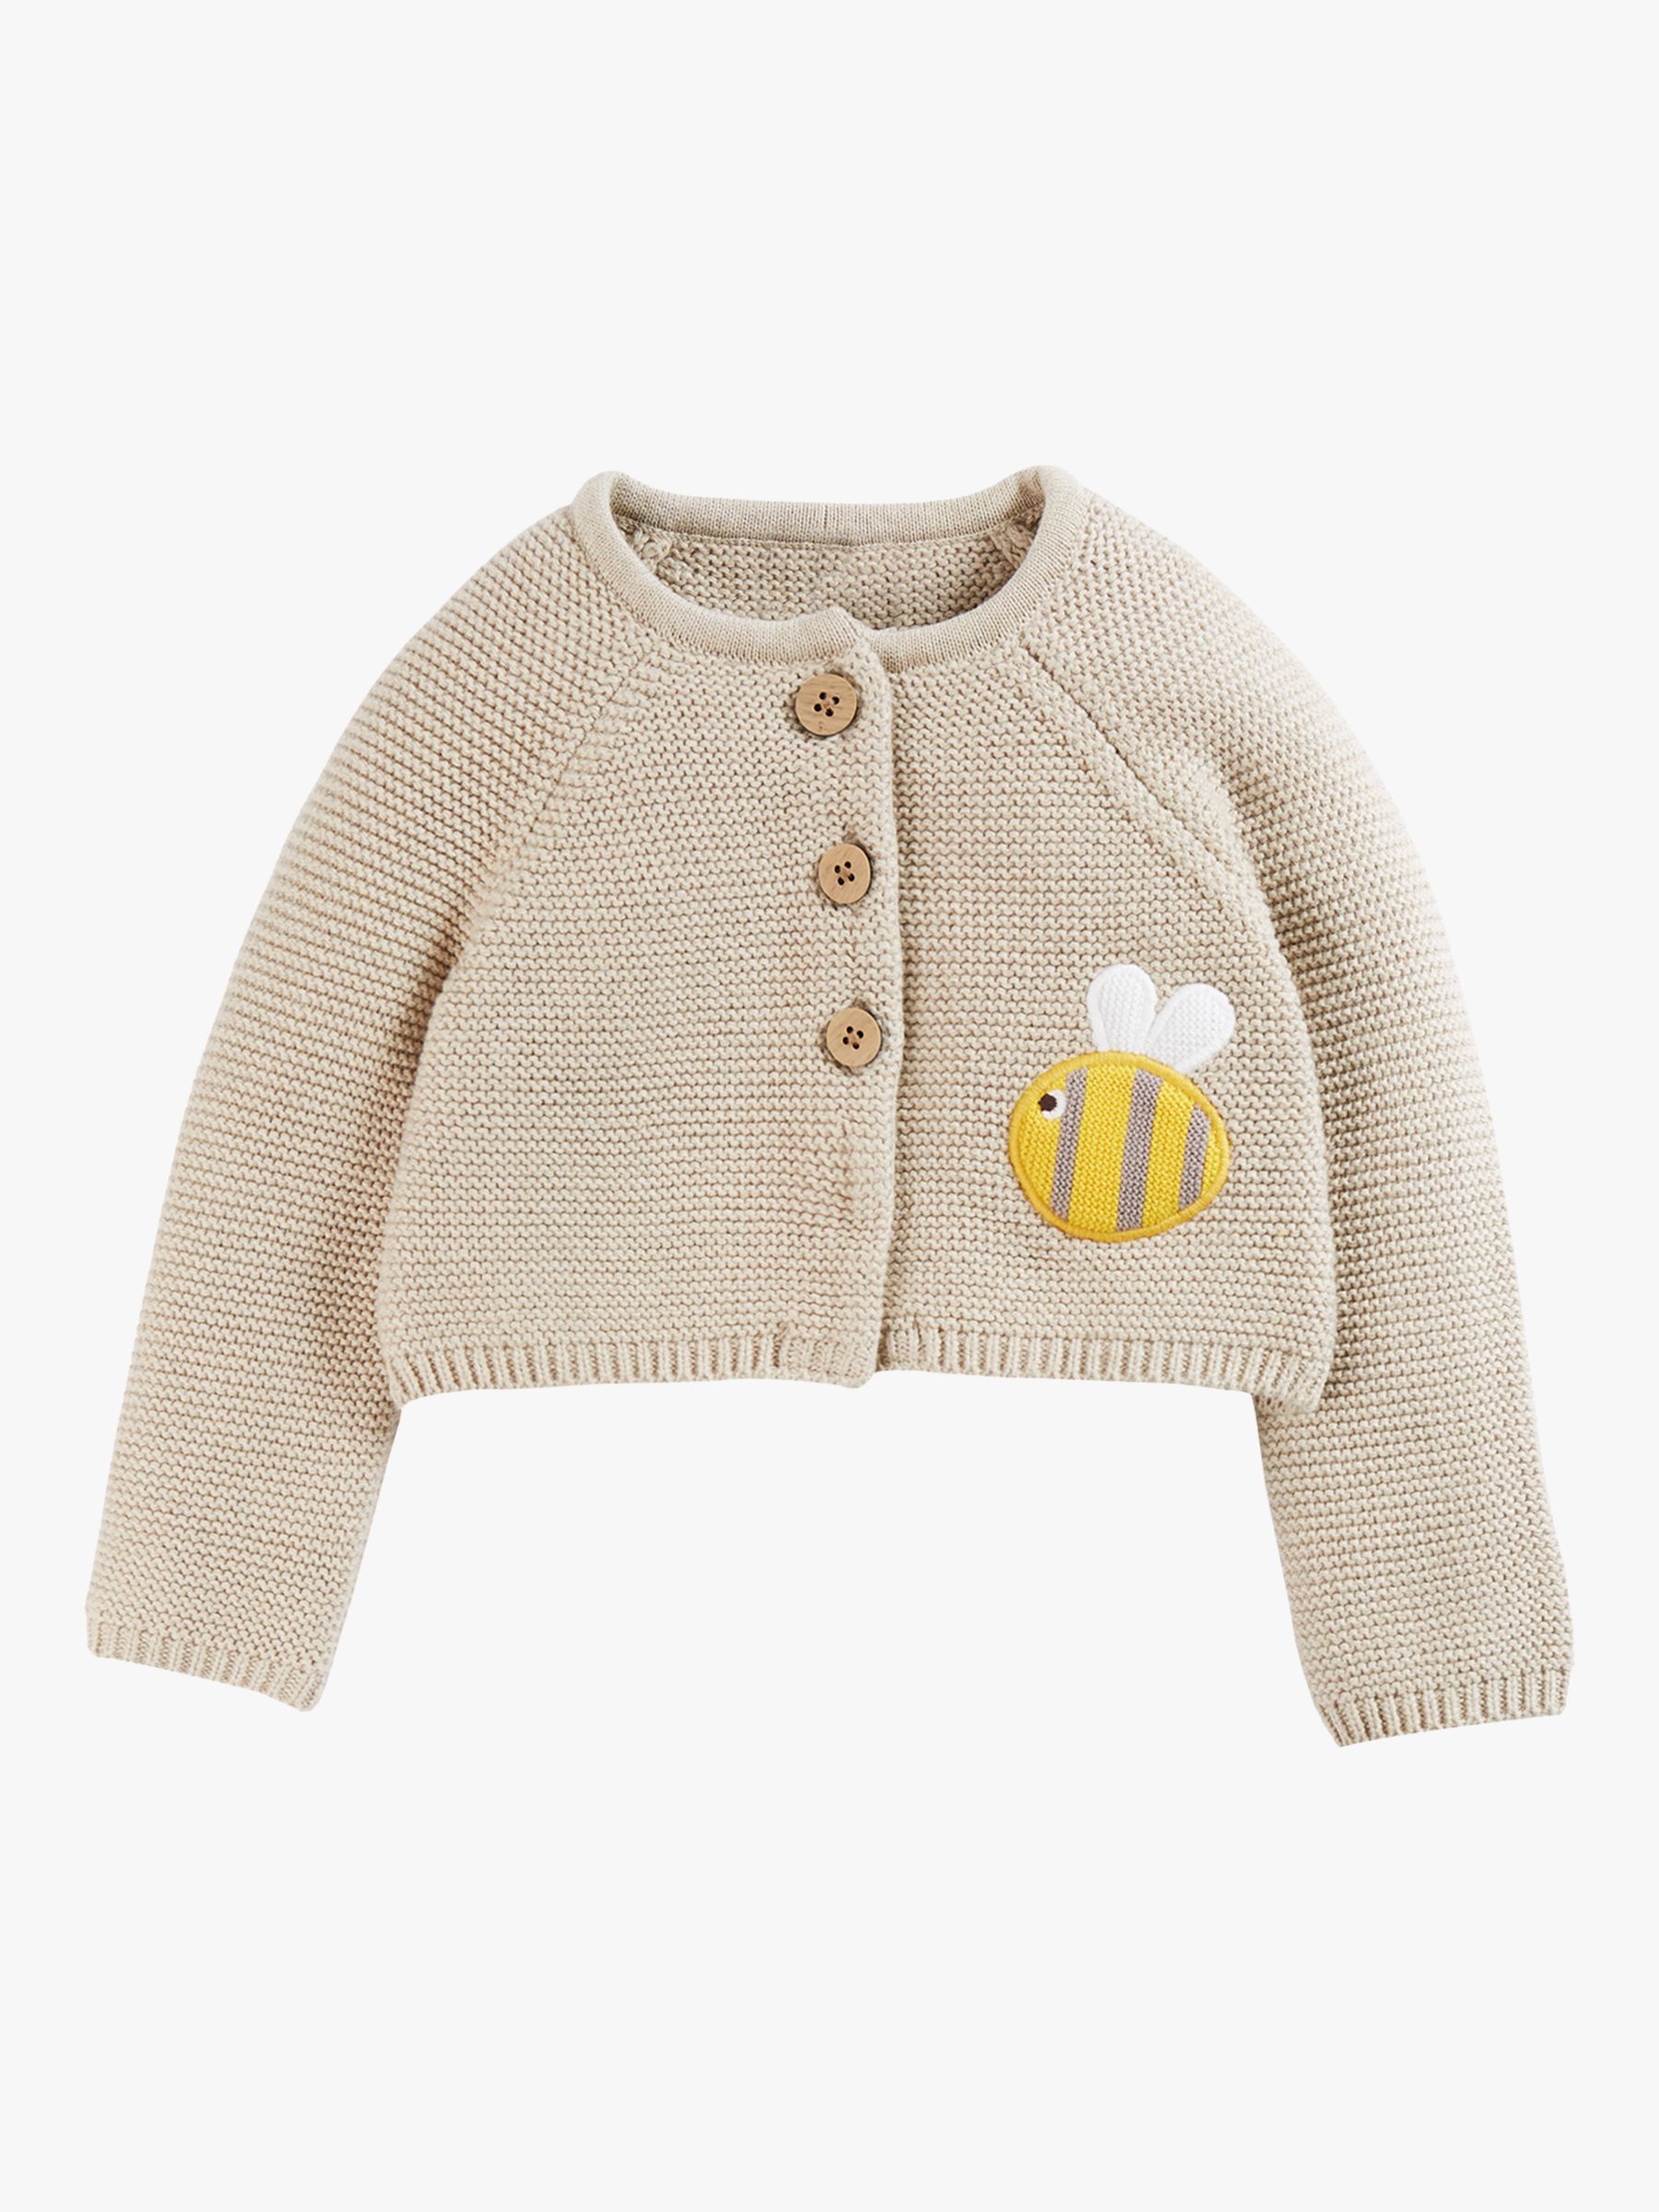 Frugi Baby Cute Embroidered Bee Organic Cotton Cardigan, Oatmeal, 18-24 months